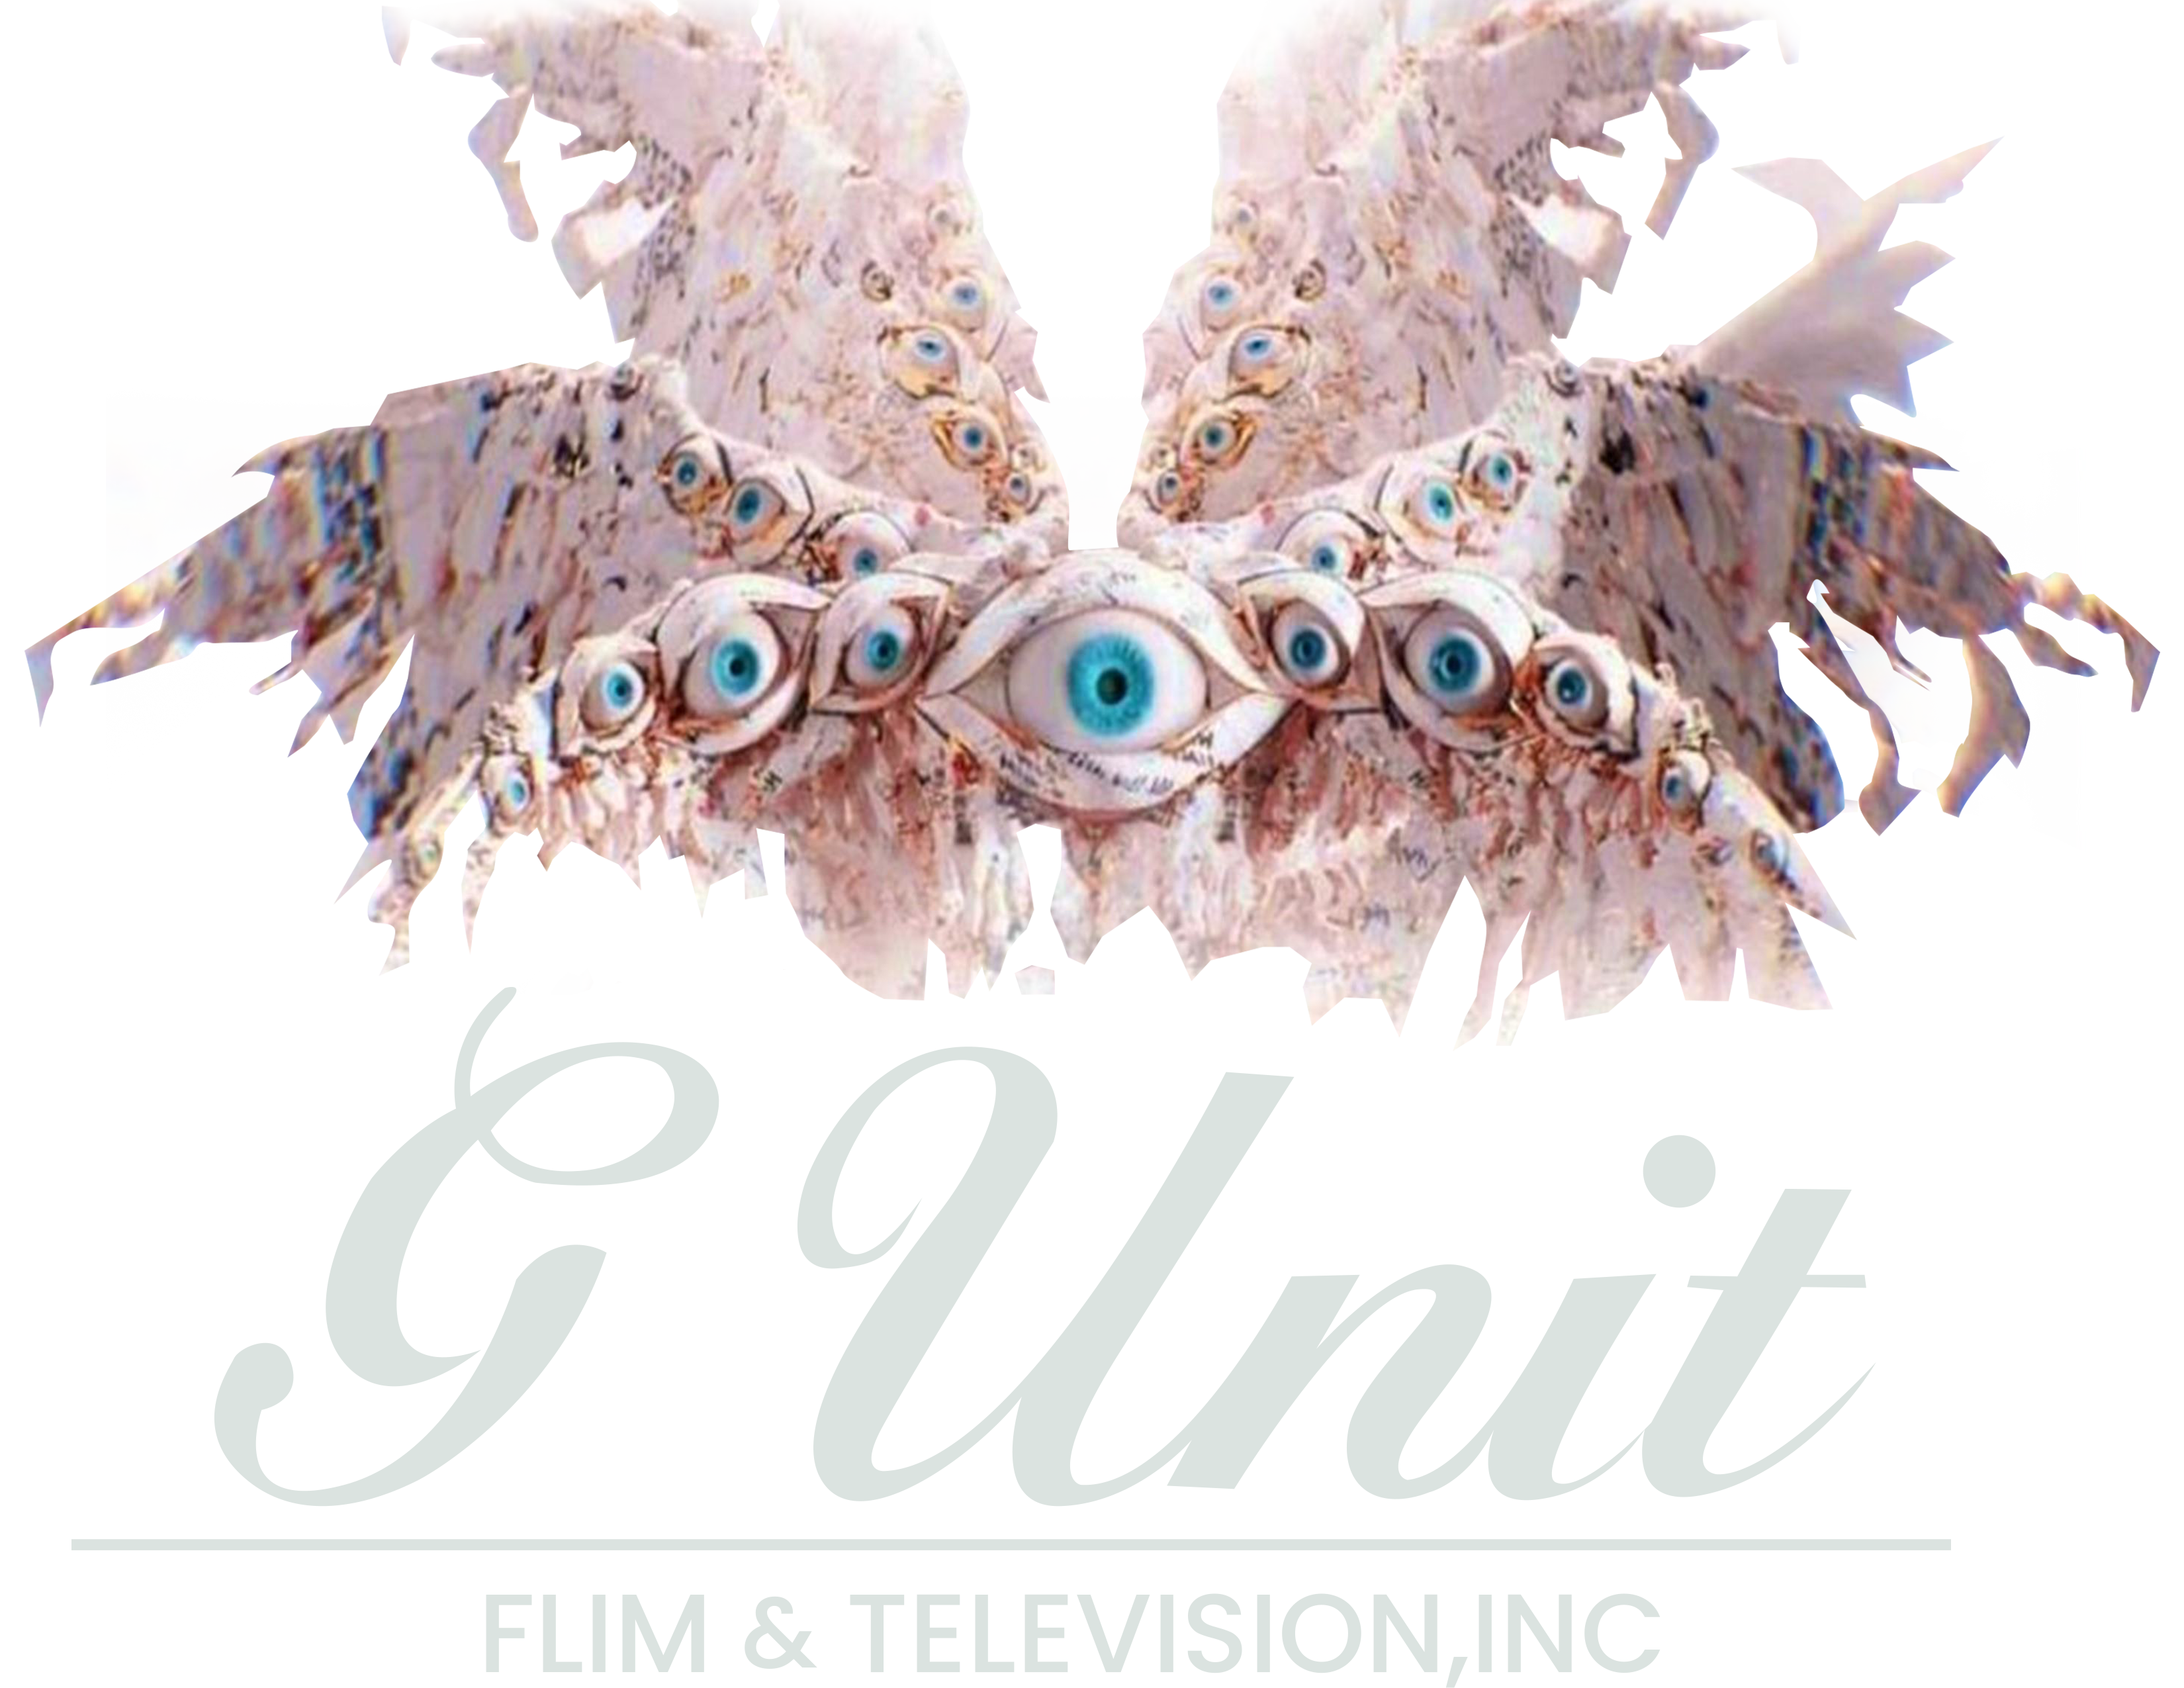 Thing 50 Cent Gunit Film & Television Production